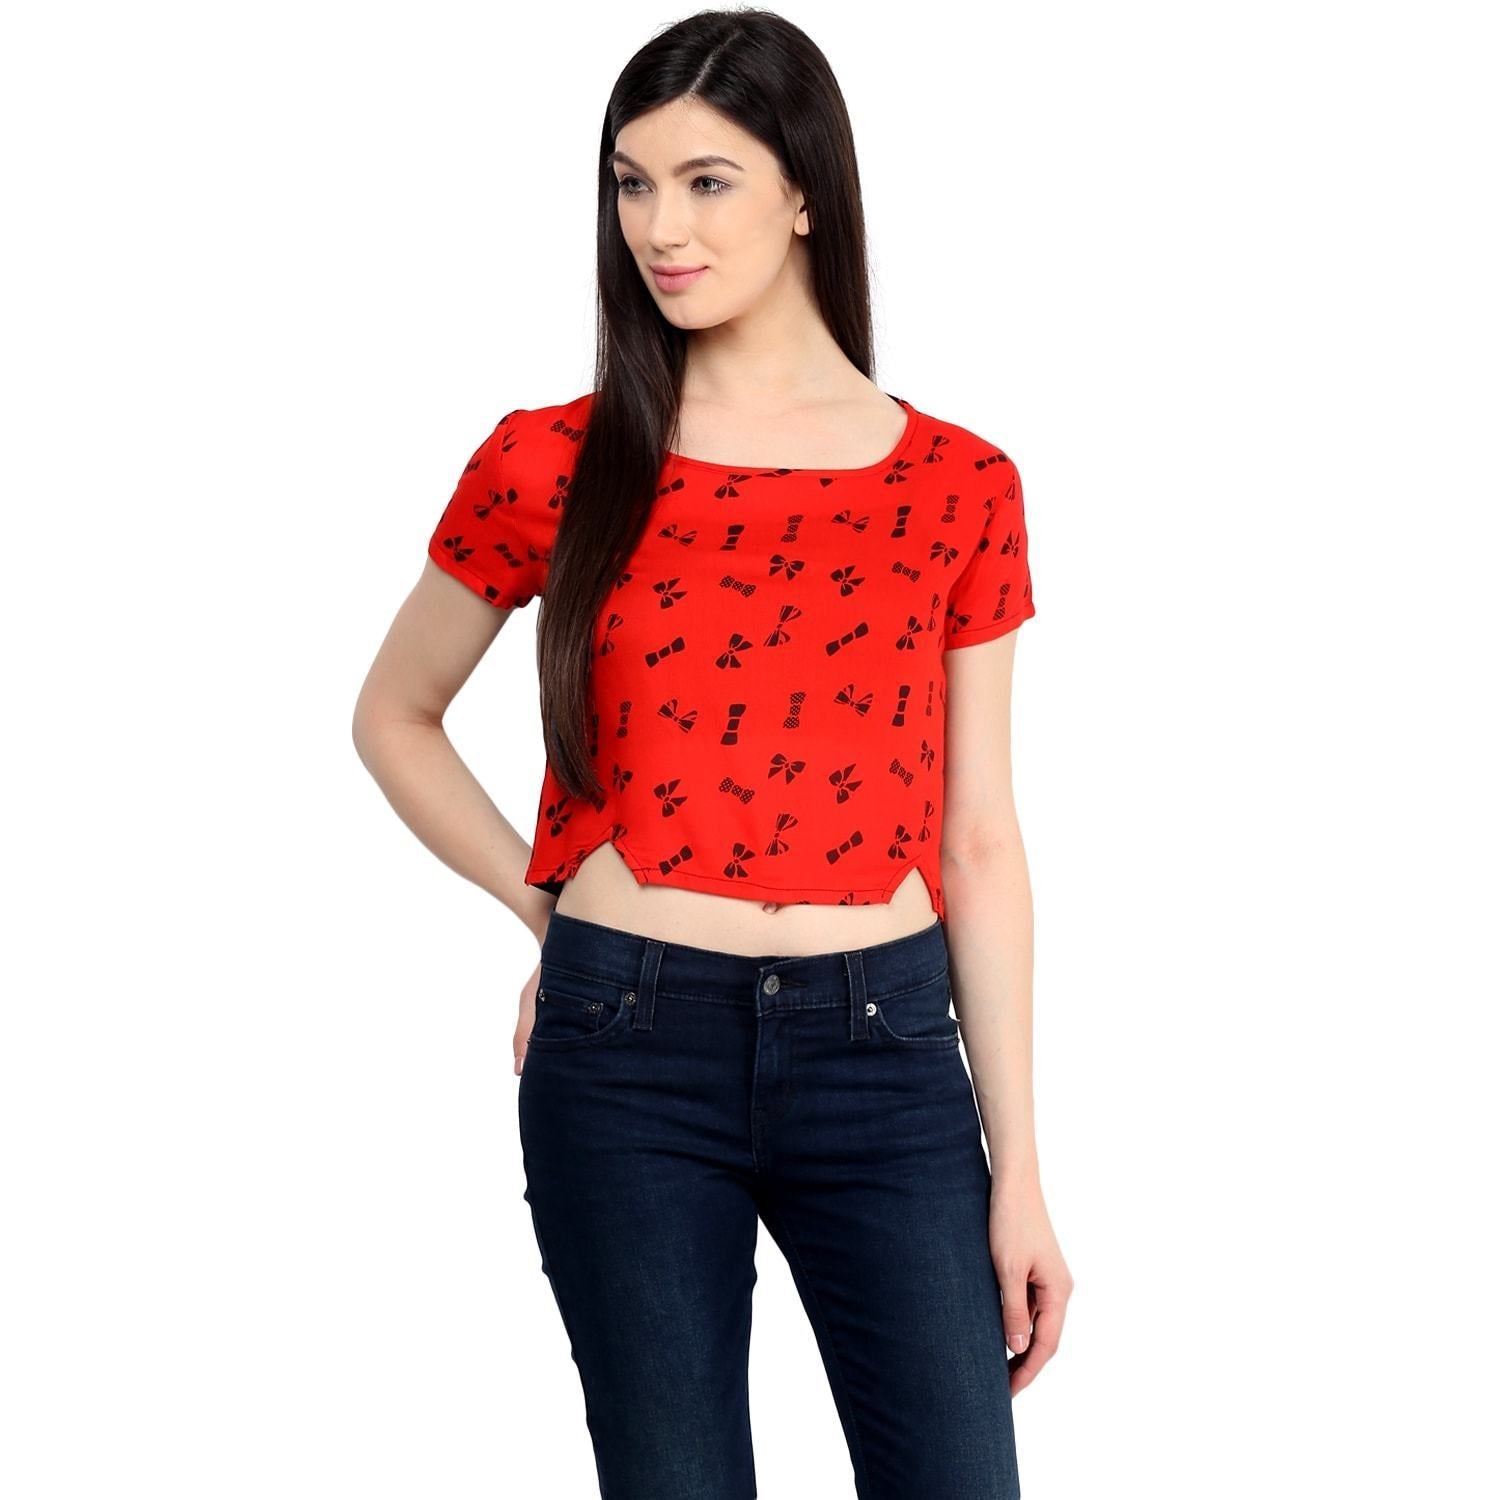 Women's Red Bow Crop Top - Pannkh